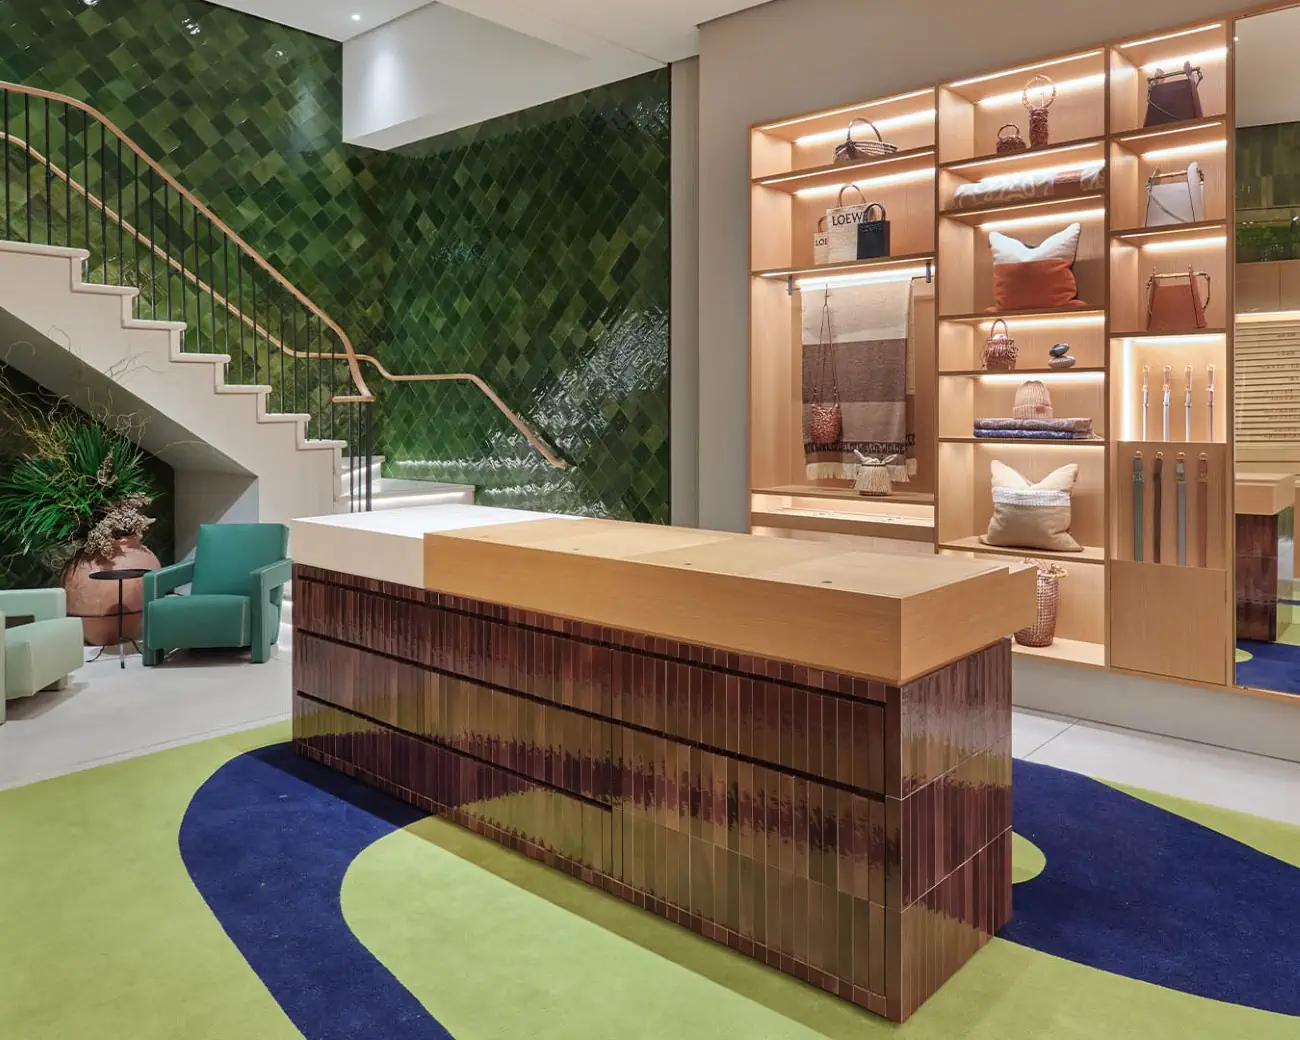 Loewe's Tokyo boutique celebrates nature and art in style